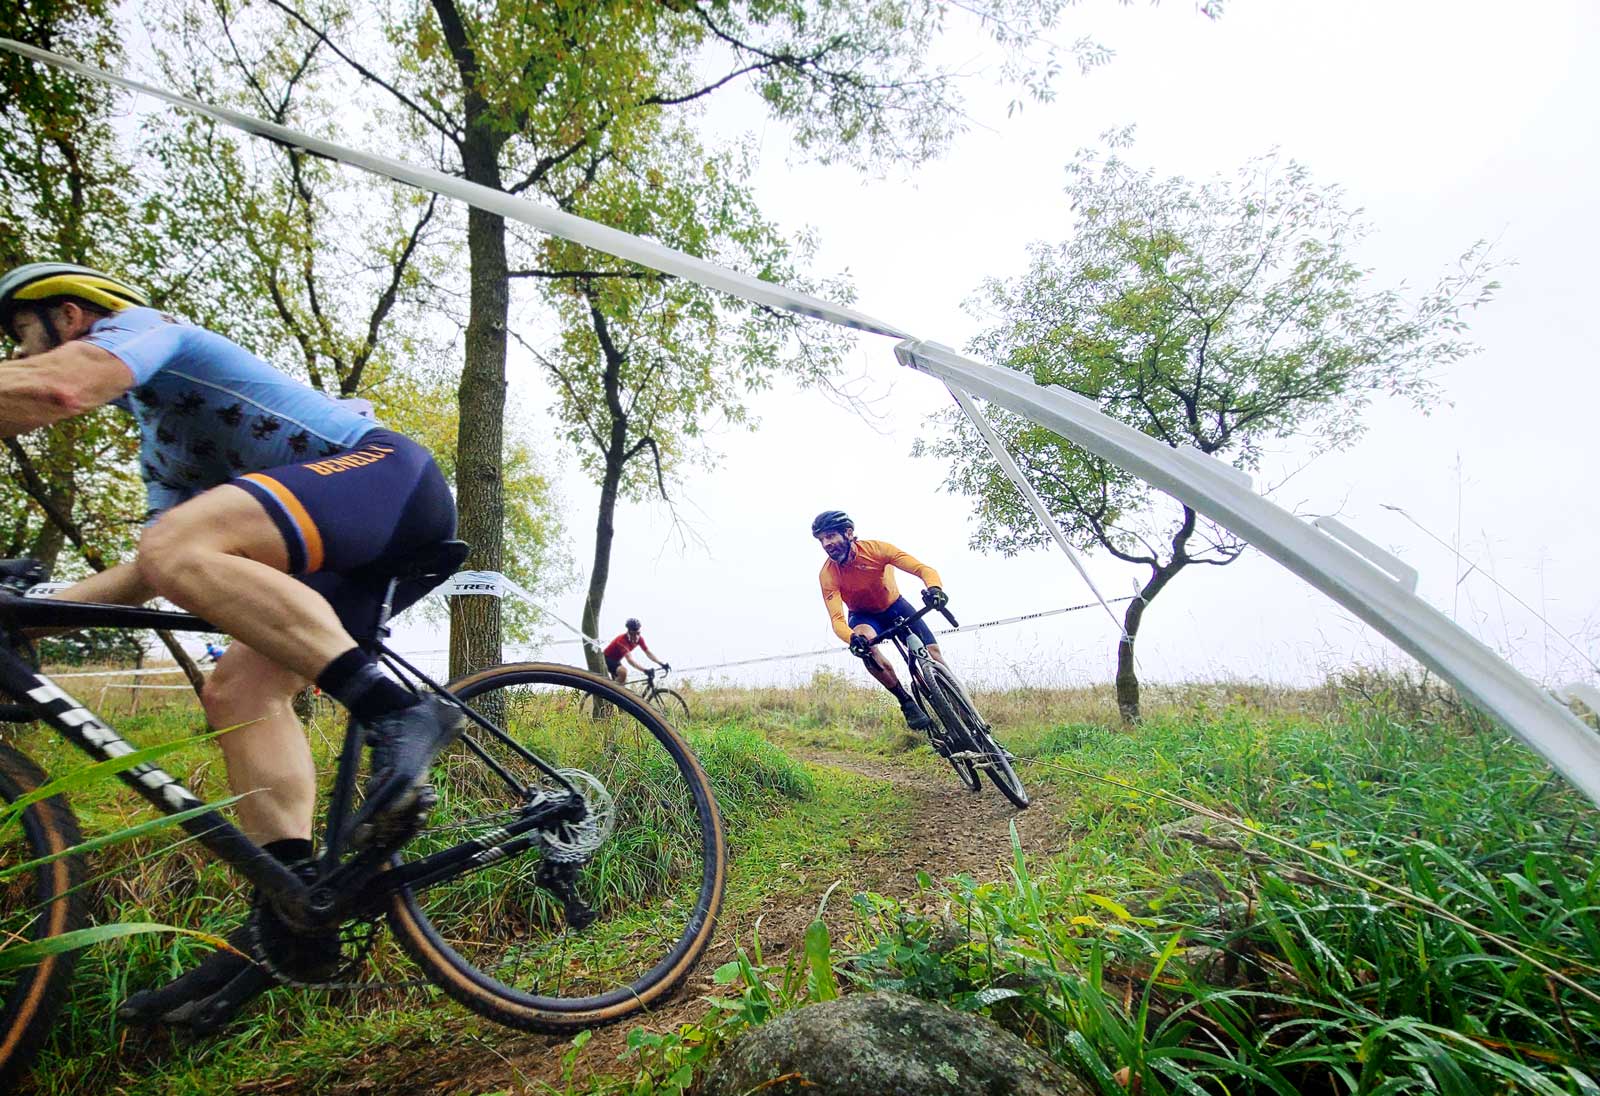 Applications now being accepted: Host a CX race in 2023